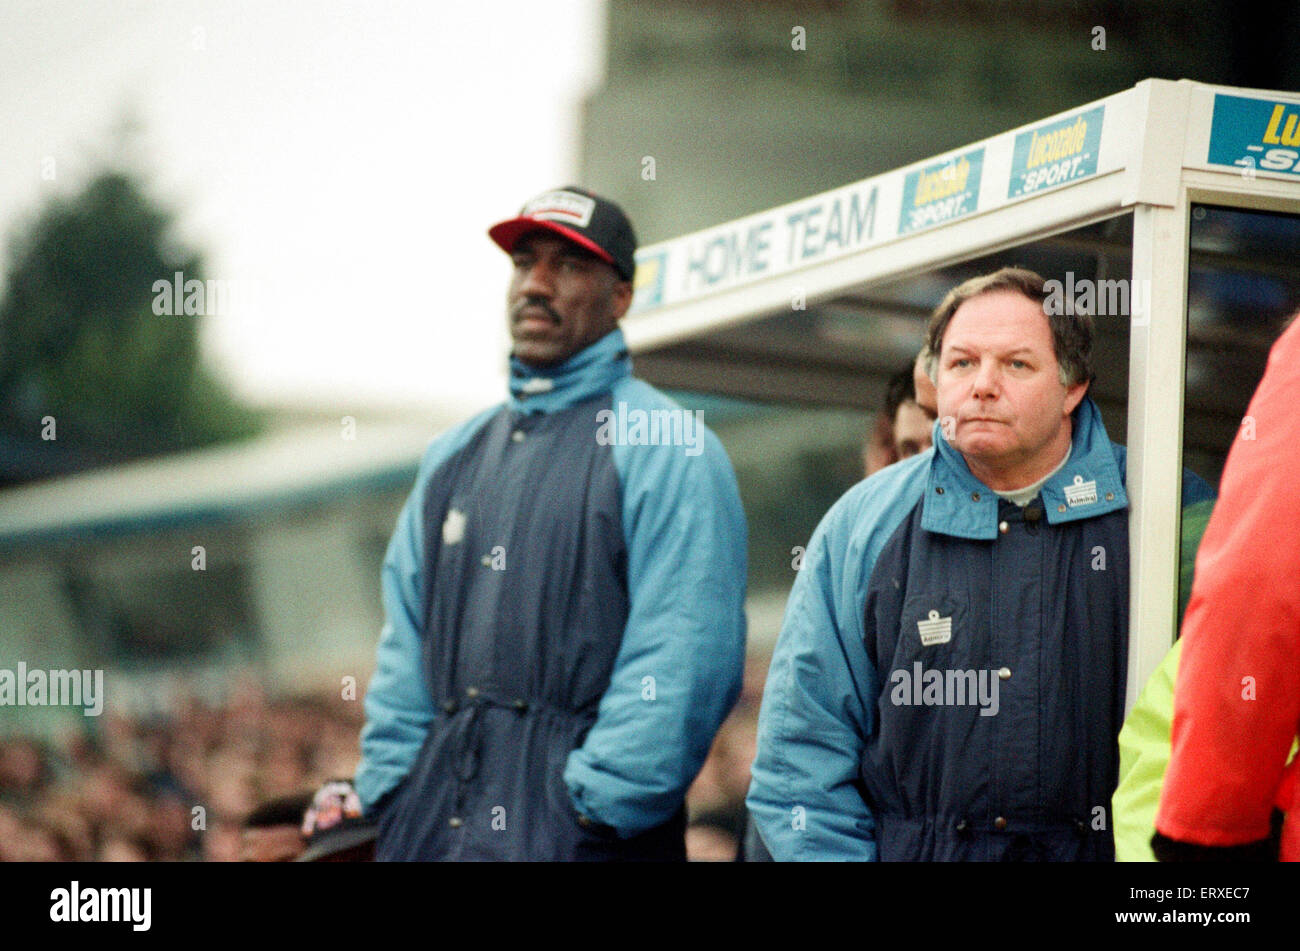 Birmingham City manager Barry Fry in the dugout. Birmingham City v Kidderminster Harriers, final score 2-1 to Kidderminster Harriers. FA Cup 3rd round, venue St Andrews, Birmingham. 8th January 1994. Stock Photo